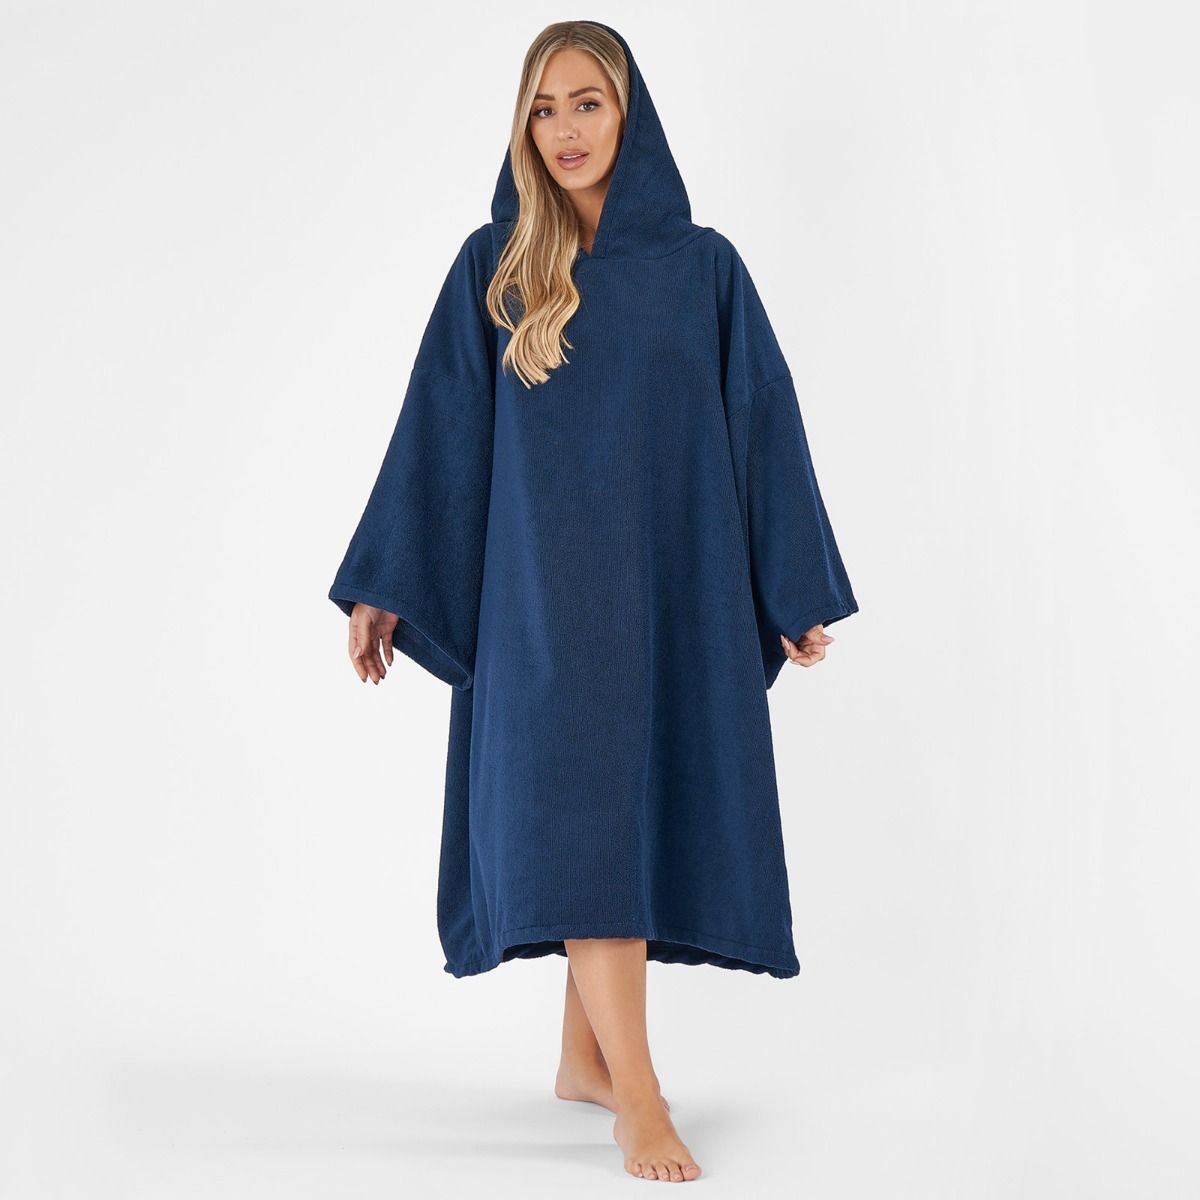 Brentfords Adult Poncho Oversized Changing Robe, Navy Blue - One Size